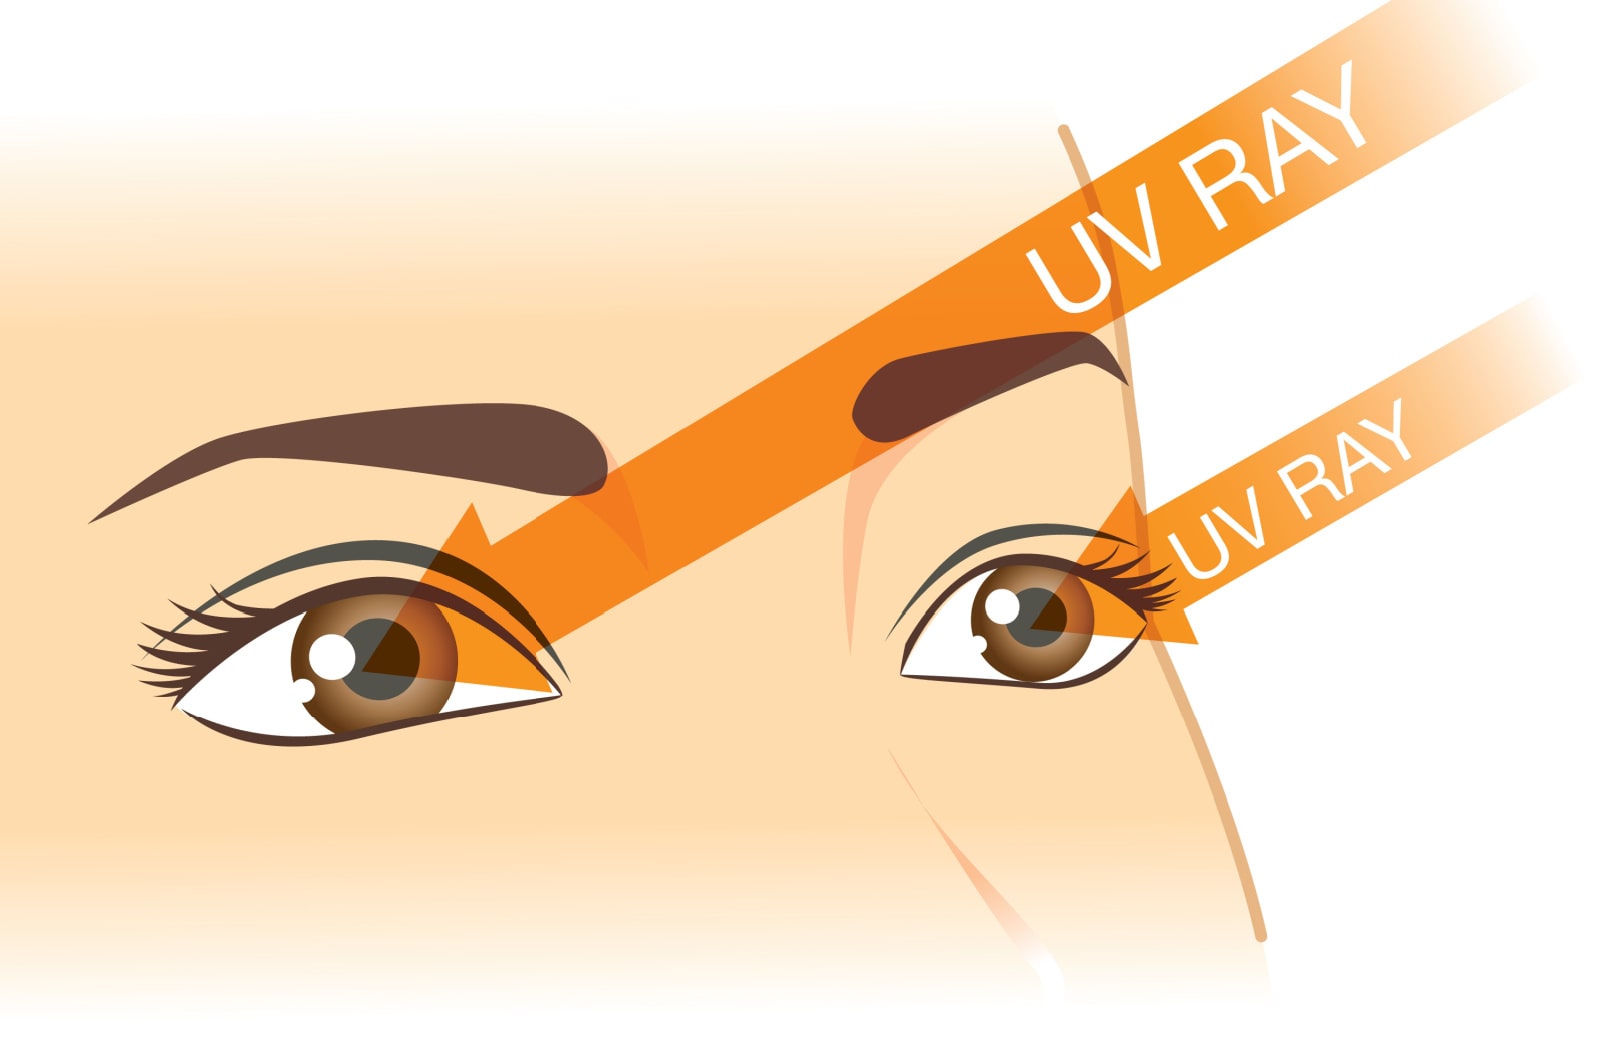 An illustration of eyes getting sunburned from the Uv rays from the sun